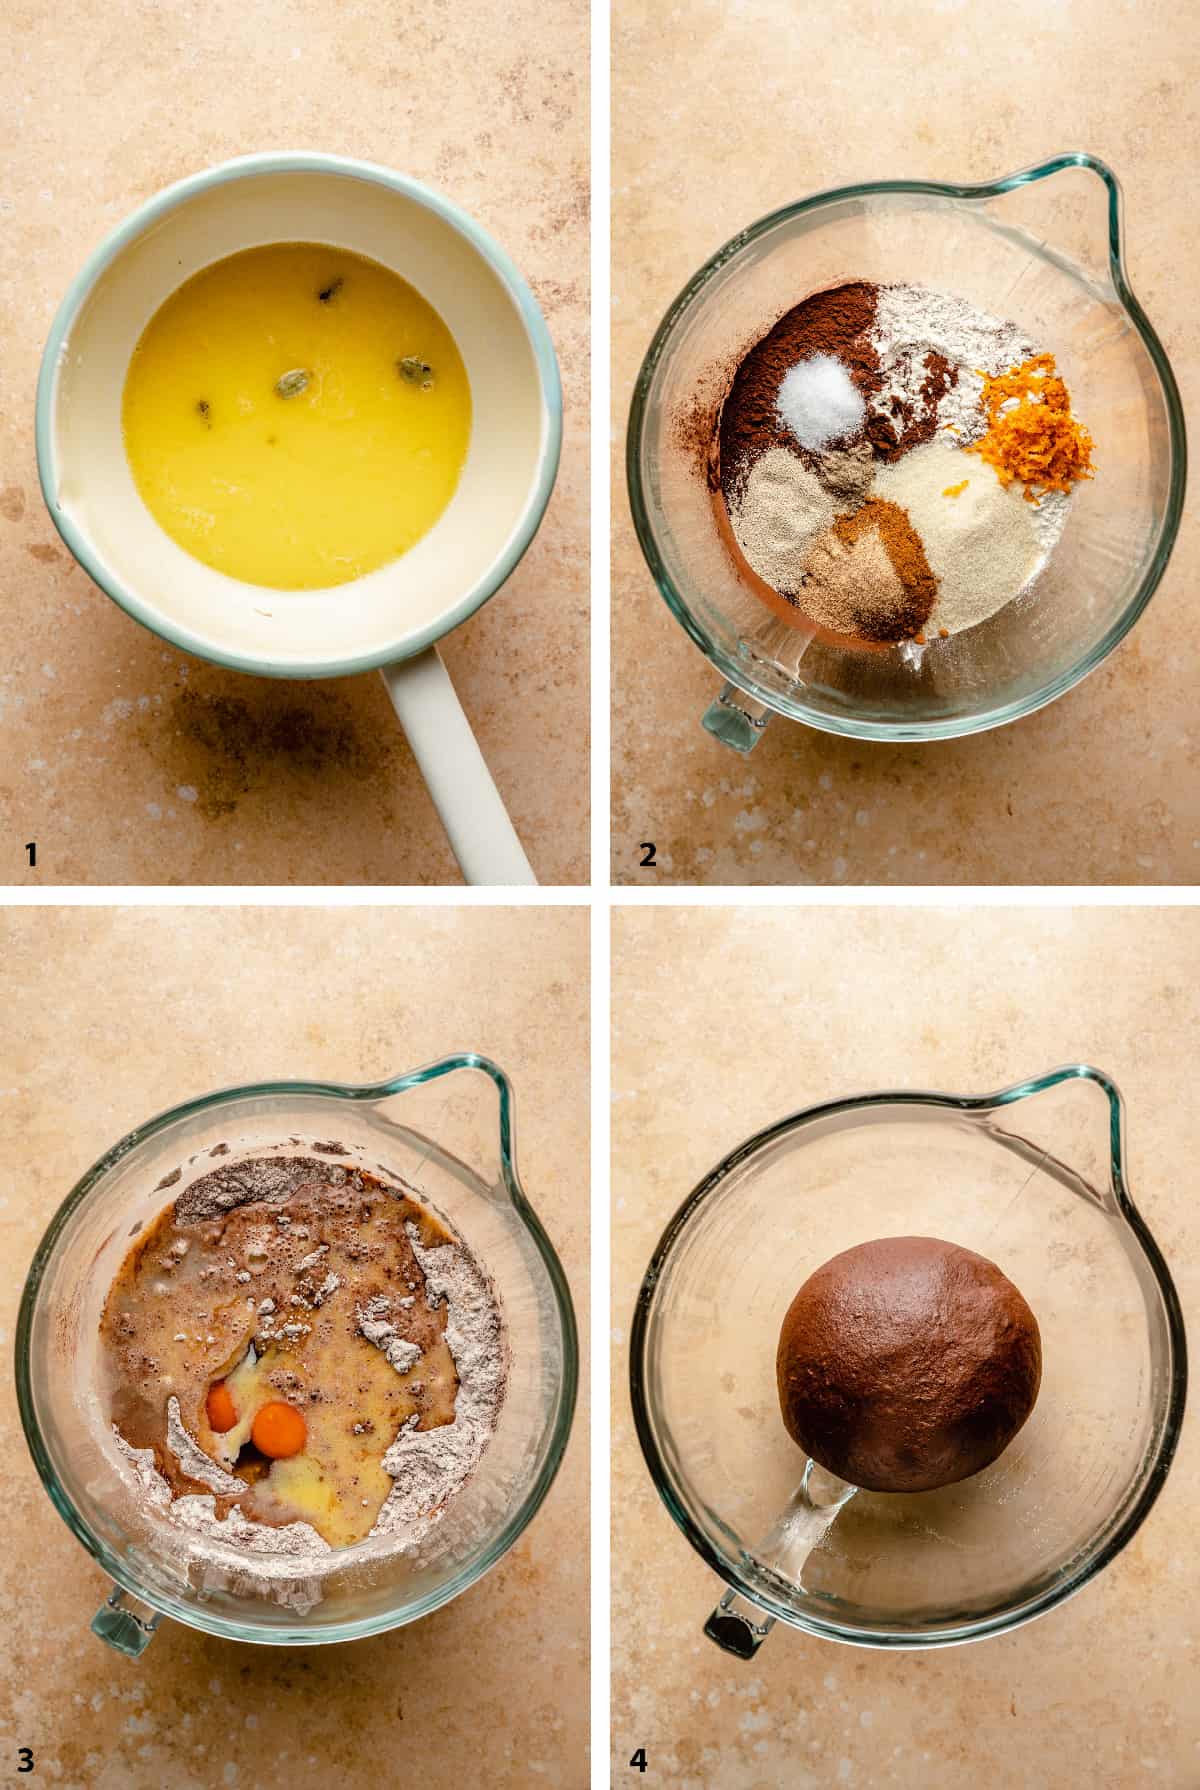 Process of creating the chocolate dough in a mixing bowl.